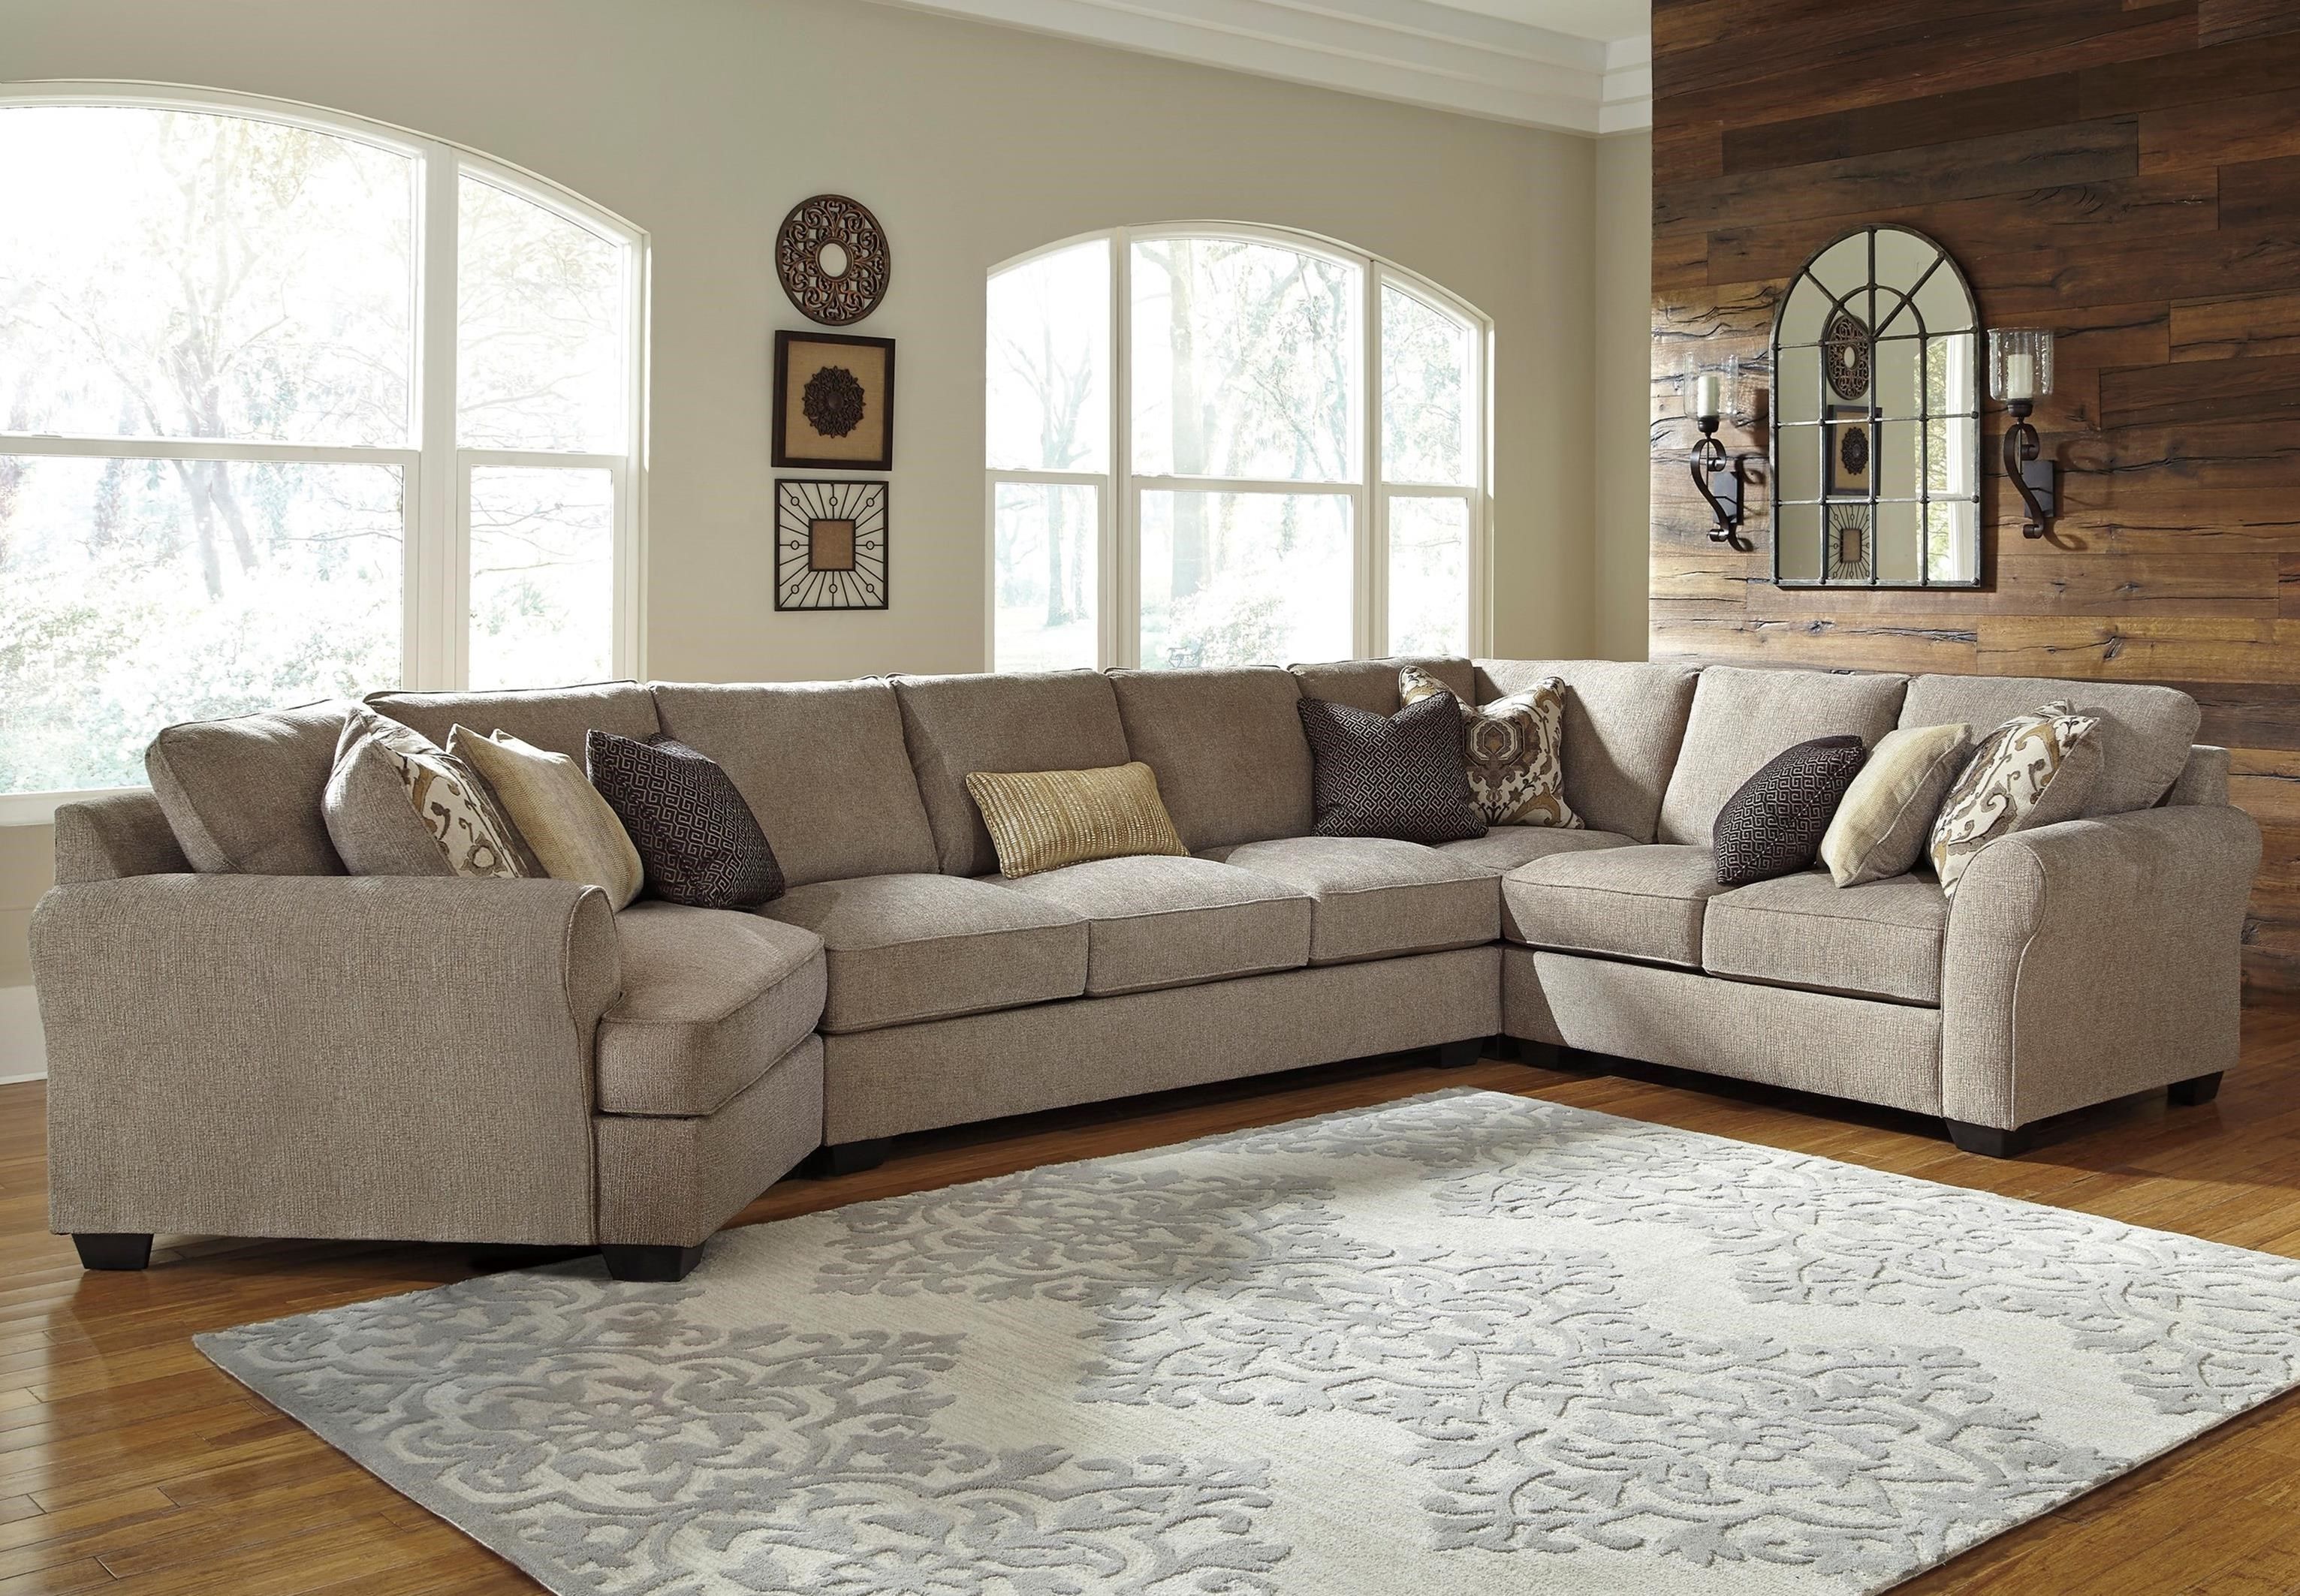 Benchcraft Pantomine 4 Piece Sectional With Left Cuddler & Armless Pertaining To Cuddler Sectional Sofas (View 4 of 10)